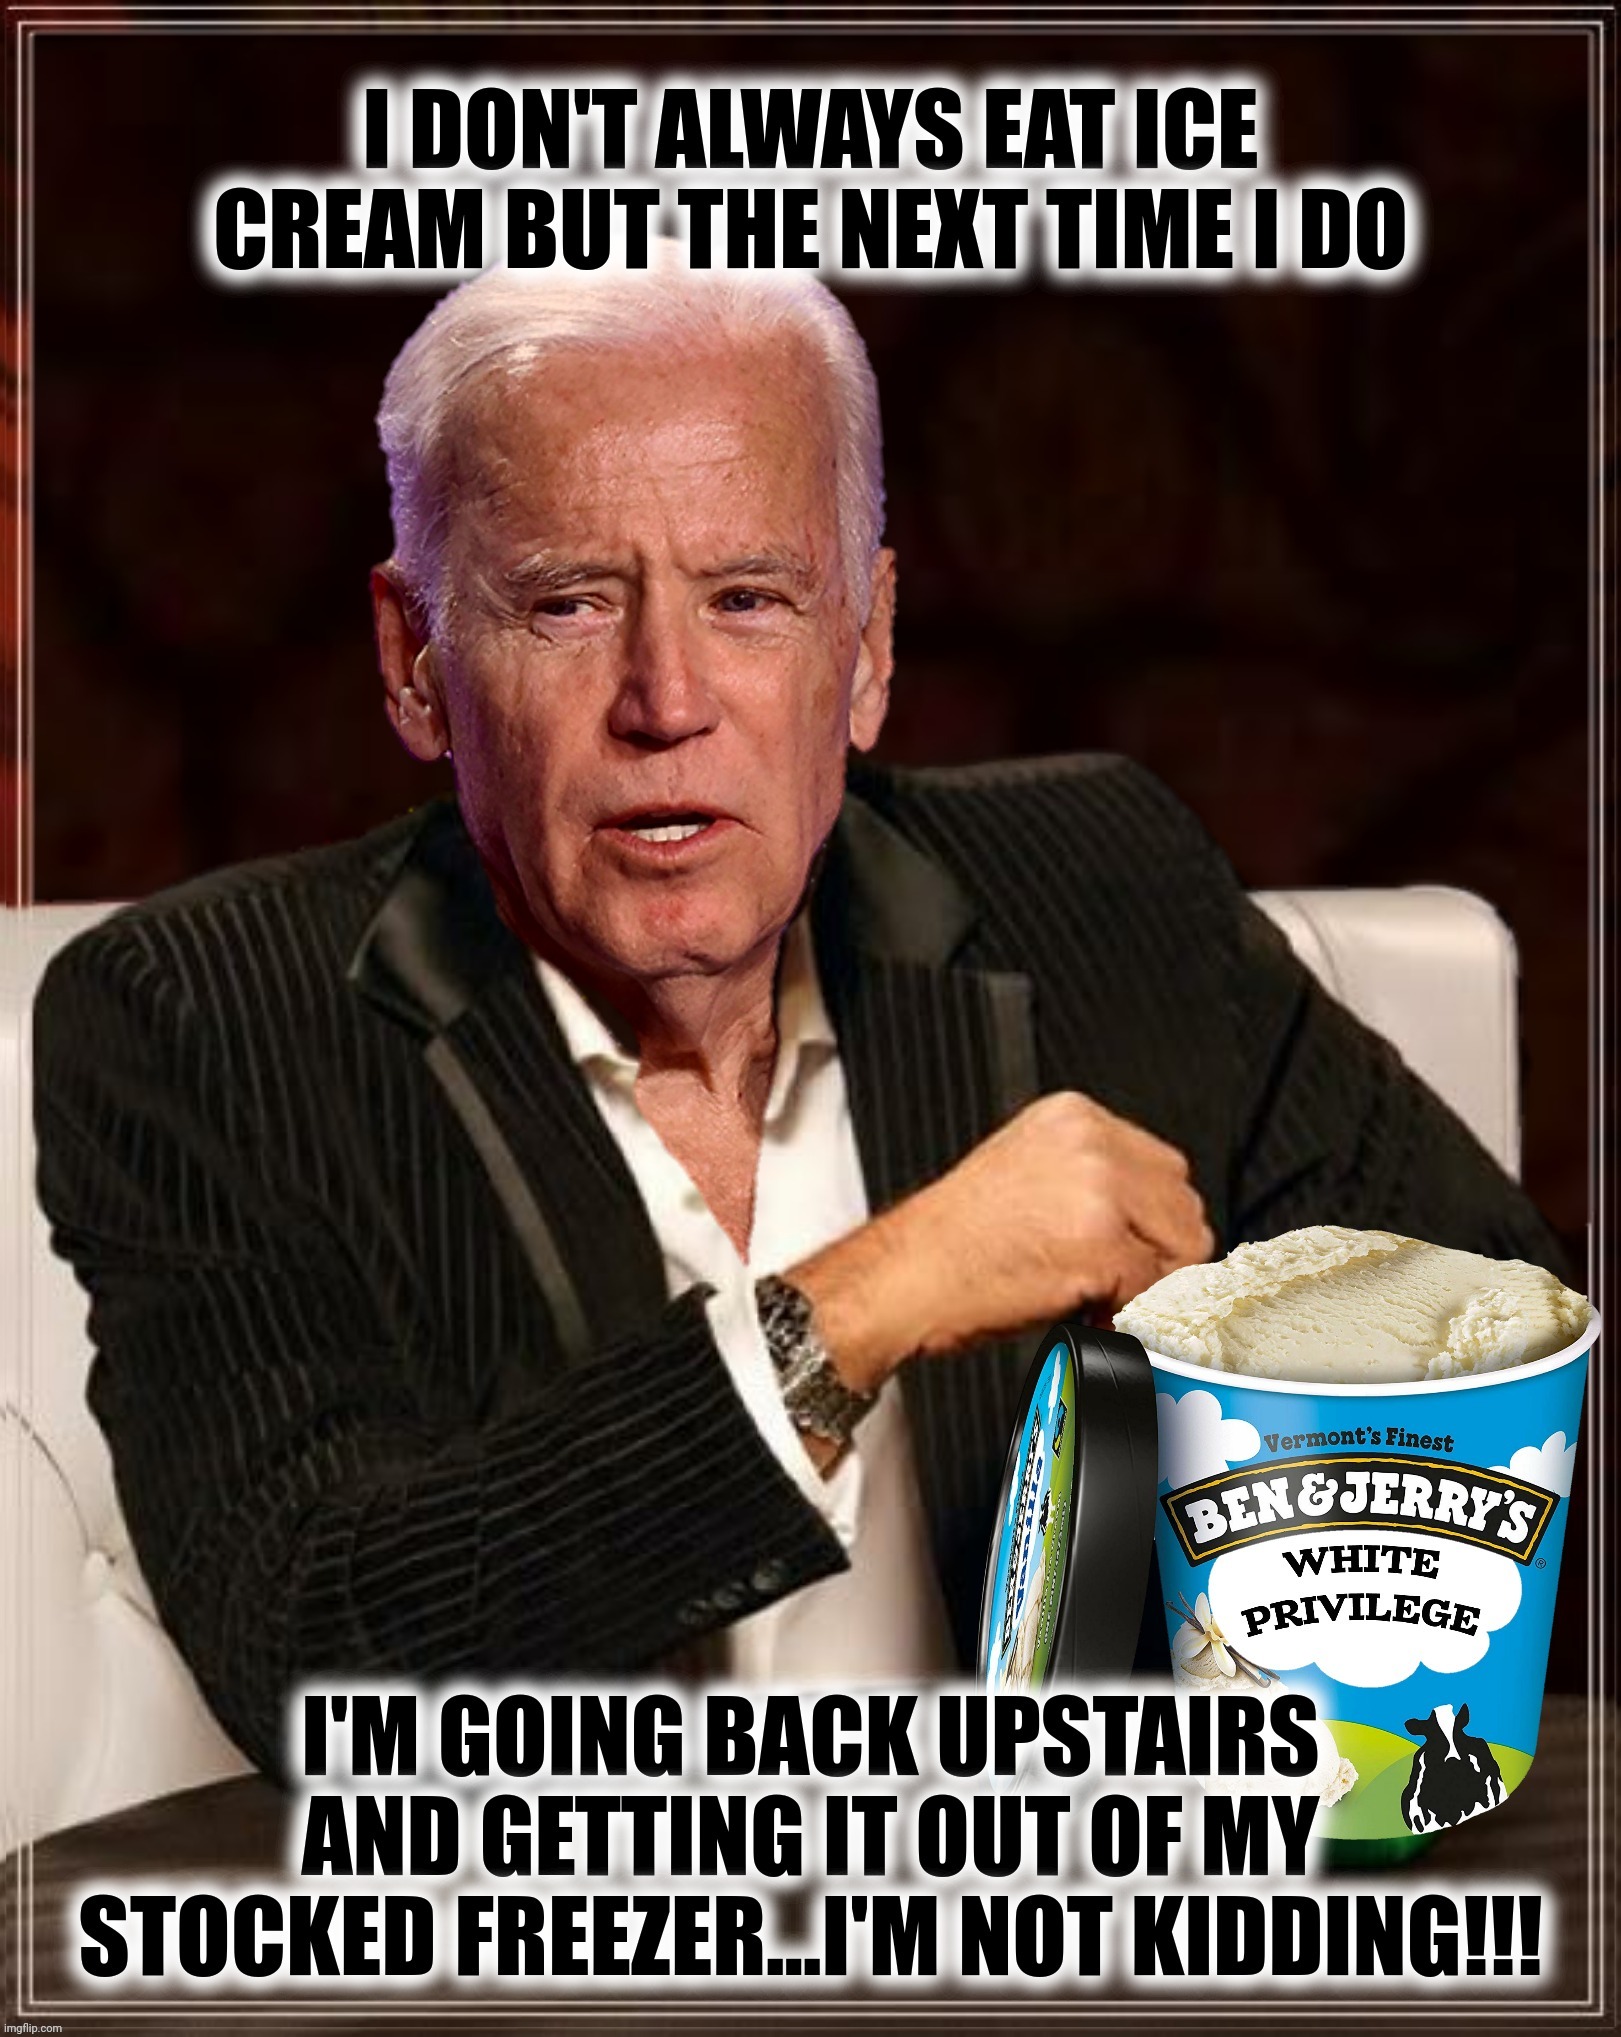 What could possibly be more important than ice cream? | image tagged in bad photoshop,joe biden,the most interesting man in the world,ice cream | made w/ Imgflip meme maker